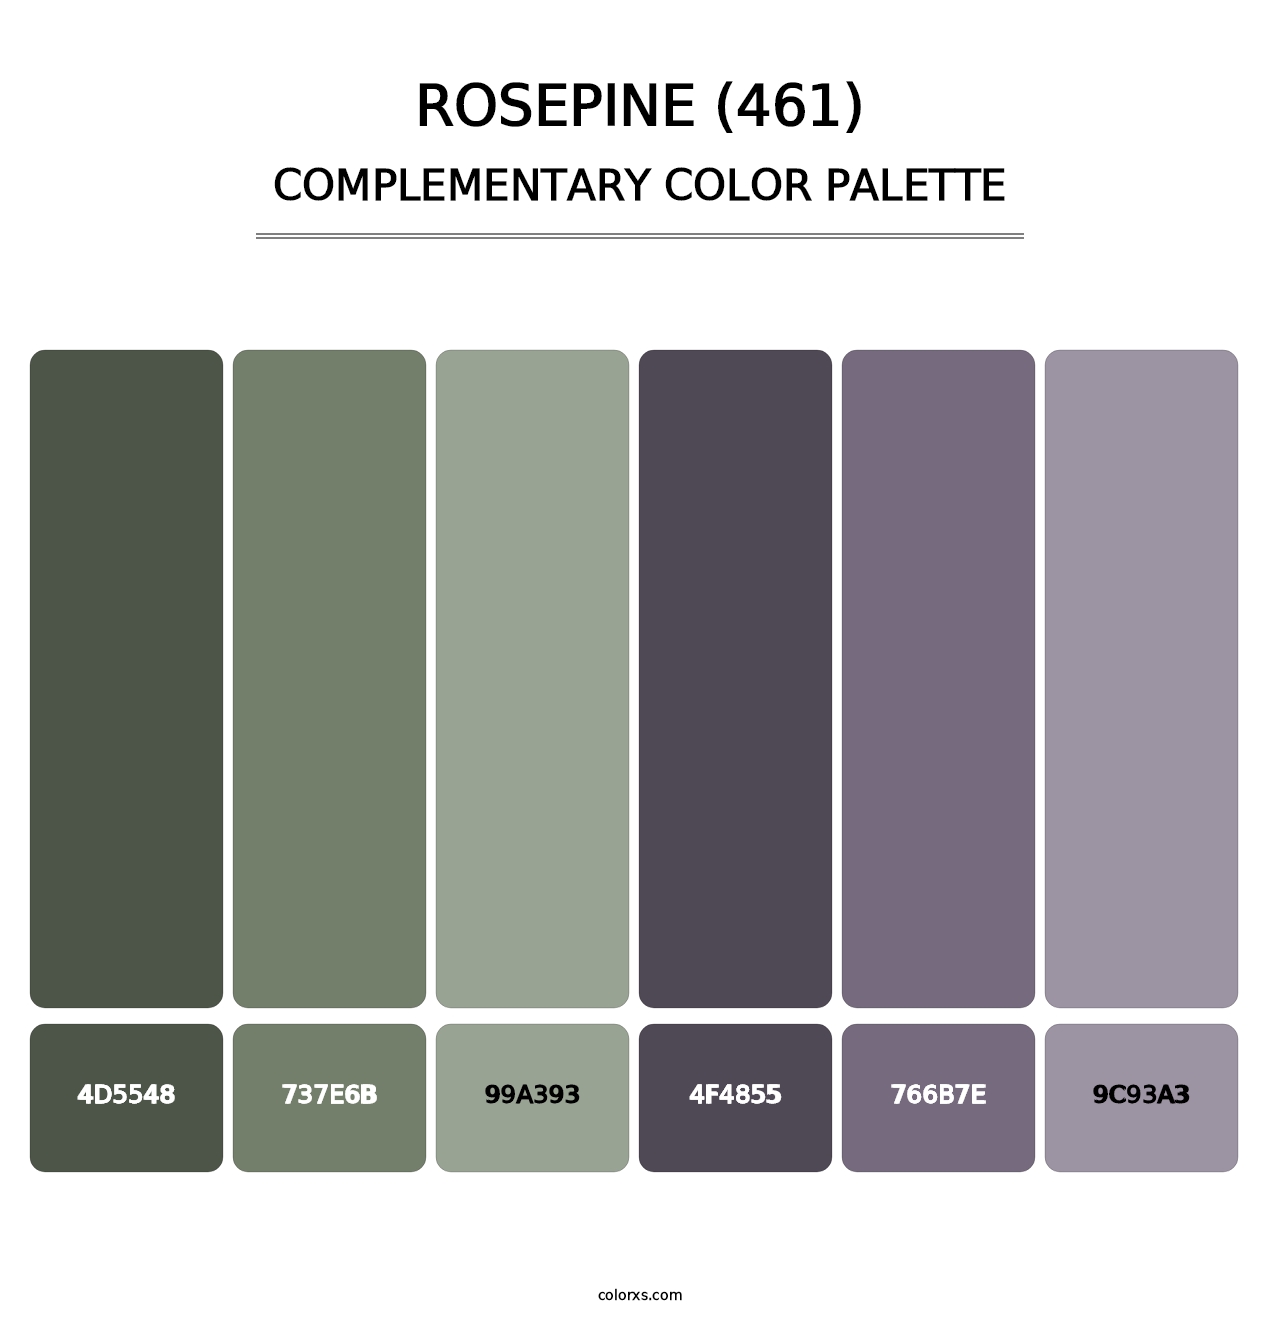 Rosepine (461) - Complementary Color Palette